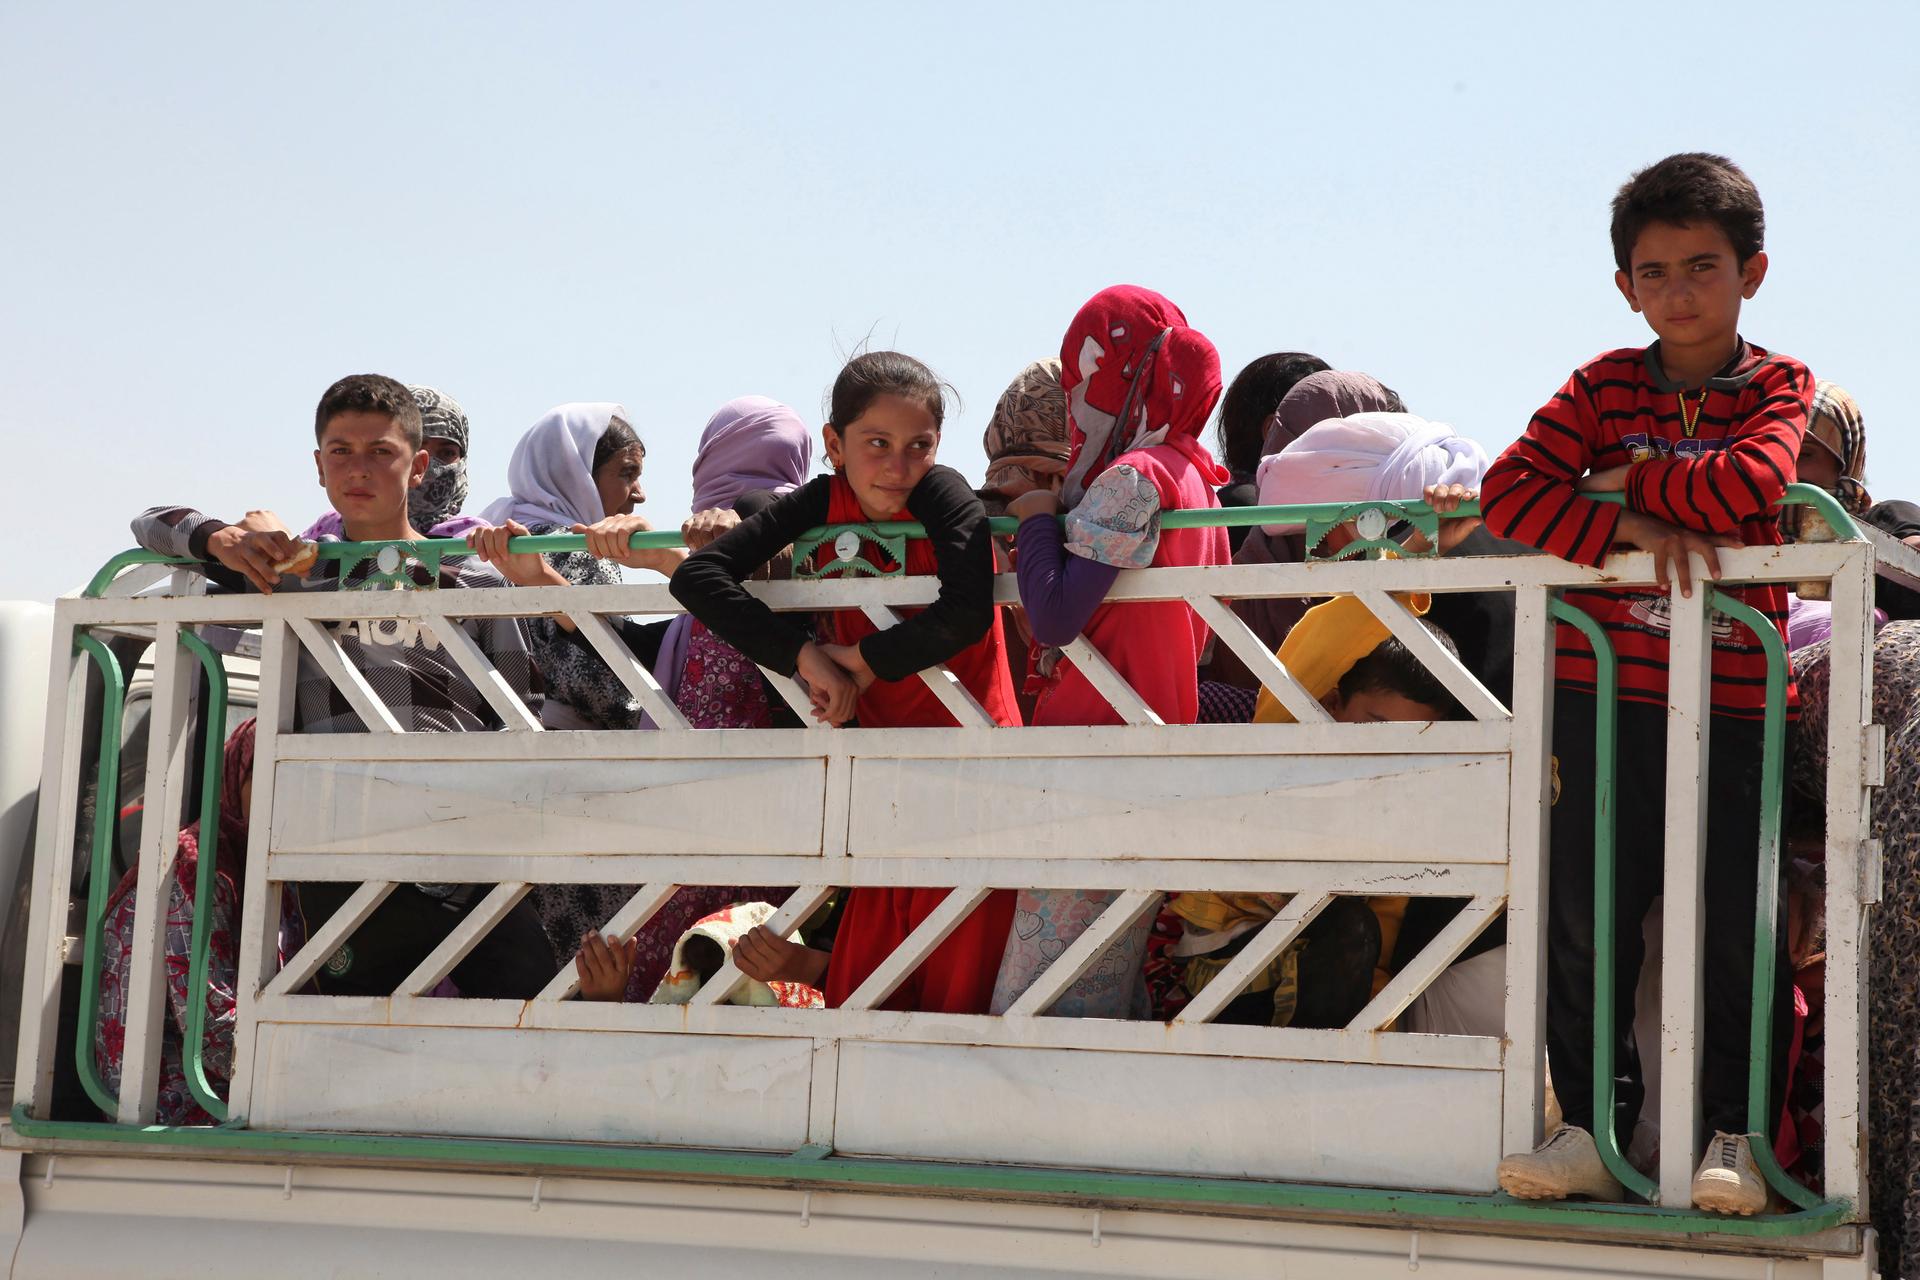 Displaced families from the minority Yazidi sect flee violence in the northern Iraqi town of Sinjar. Iraq's Prime Minister, Nuri al-Malik, ordered his air force for the first time to back Kurdish forces against Islamic State fighters after the Sunni milit